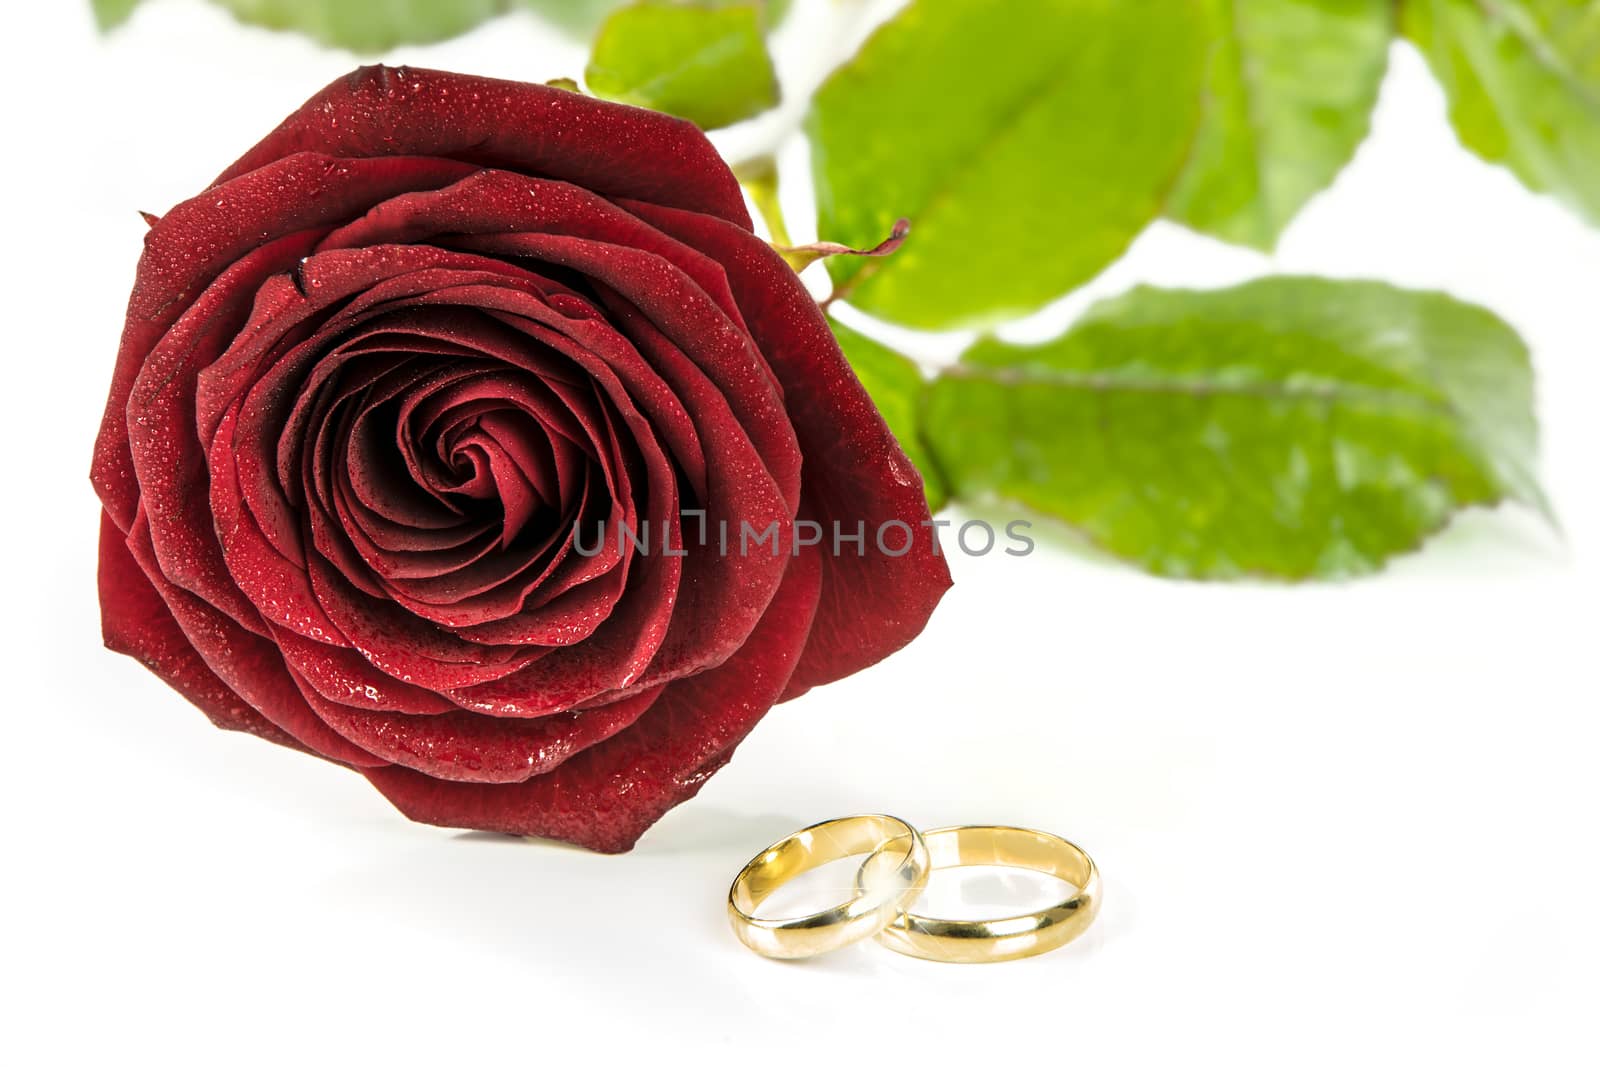 Beautiful blooming red rose and two gold wedding rings on a white background